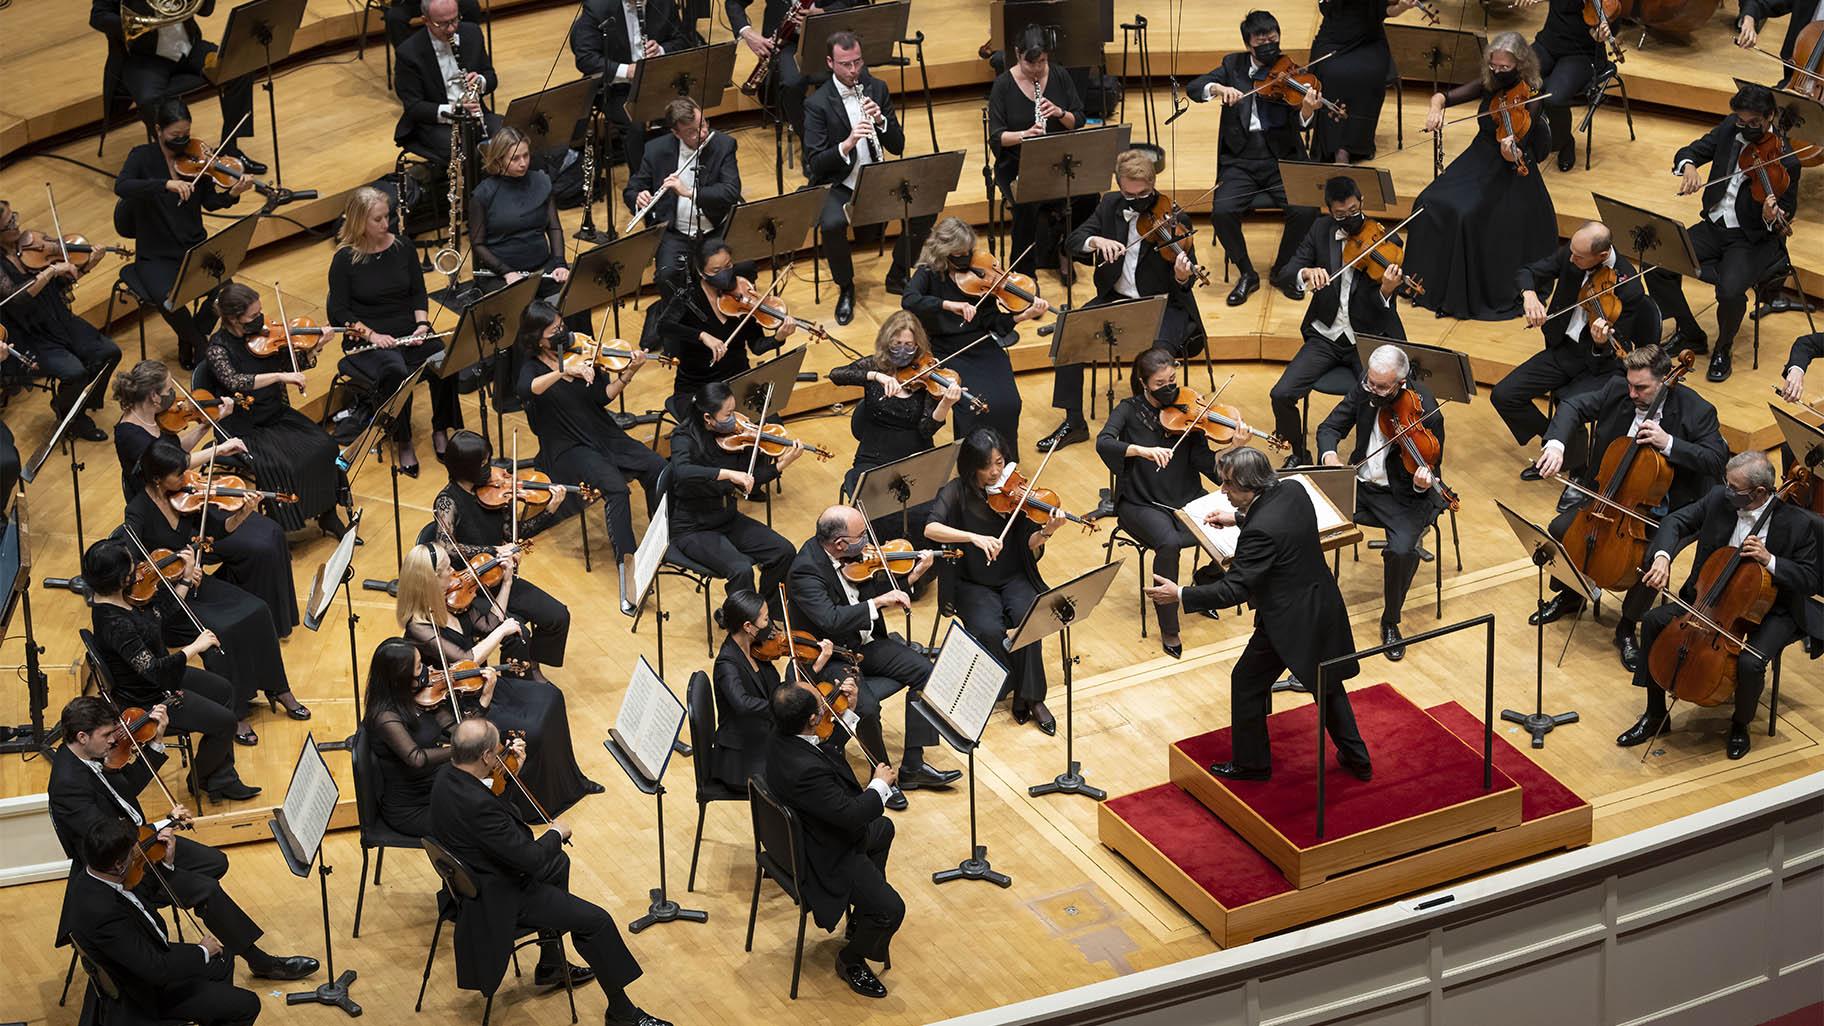 Music Director Riccardo Muti and the Chicago Symphony Orchestra perform Tchaikovsky’s Symphony No. 6 (Pathétique) as part of Muti’s final program in his fall 2021 residency. (Credit Todd Rosenberg Photography)